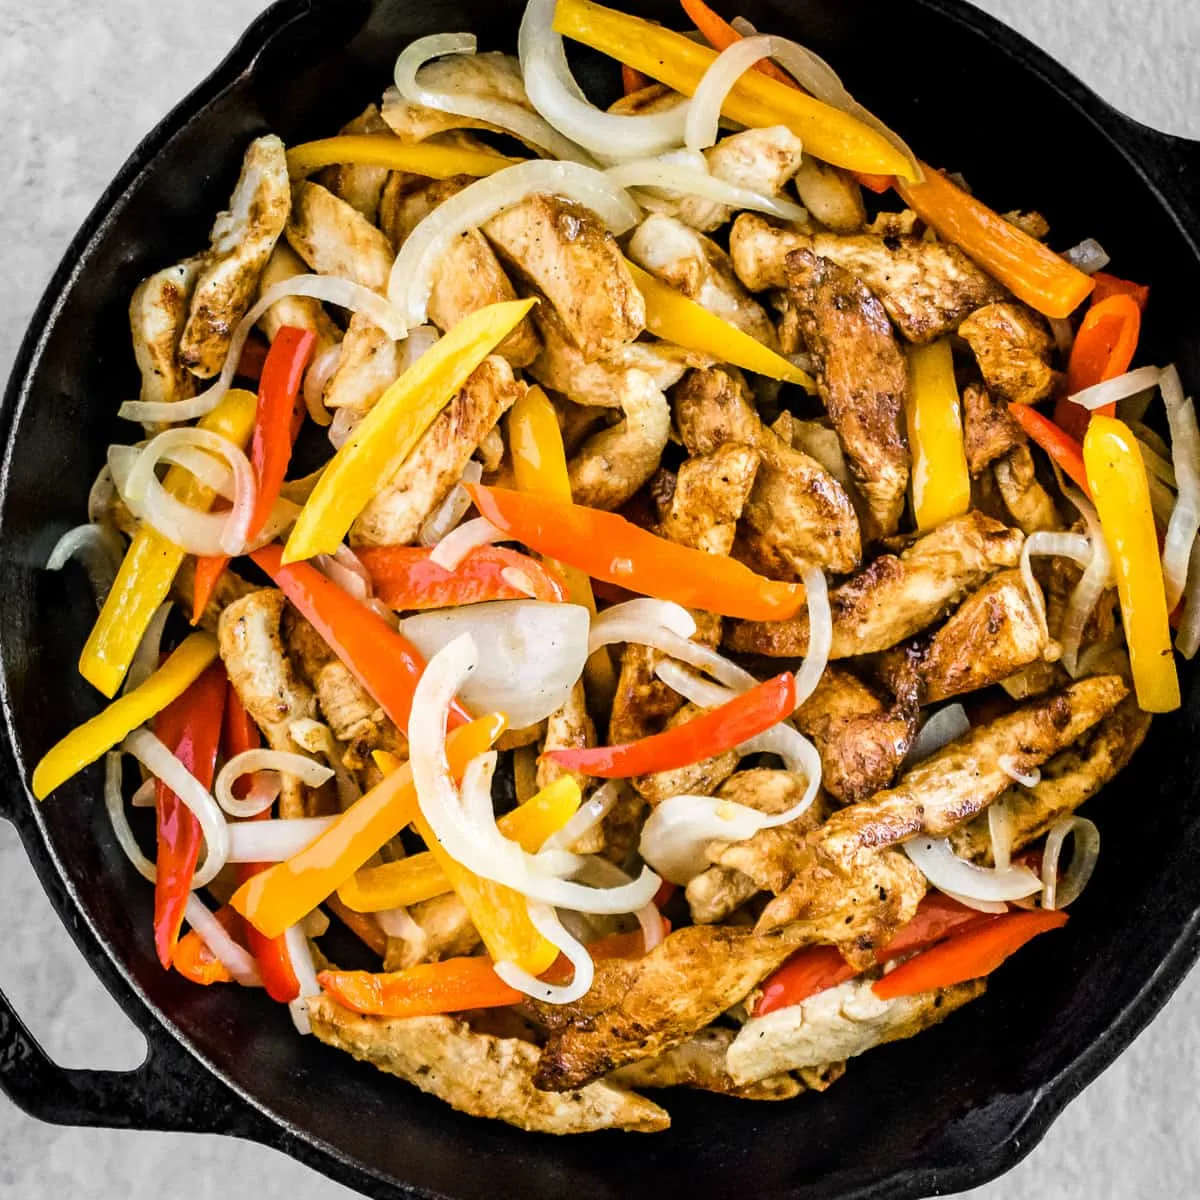 Chicken fajitas with bell peppers in a skillet.